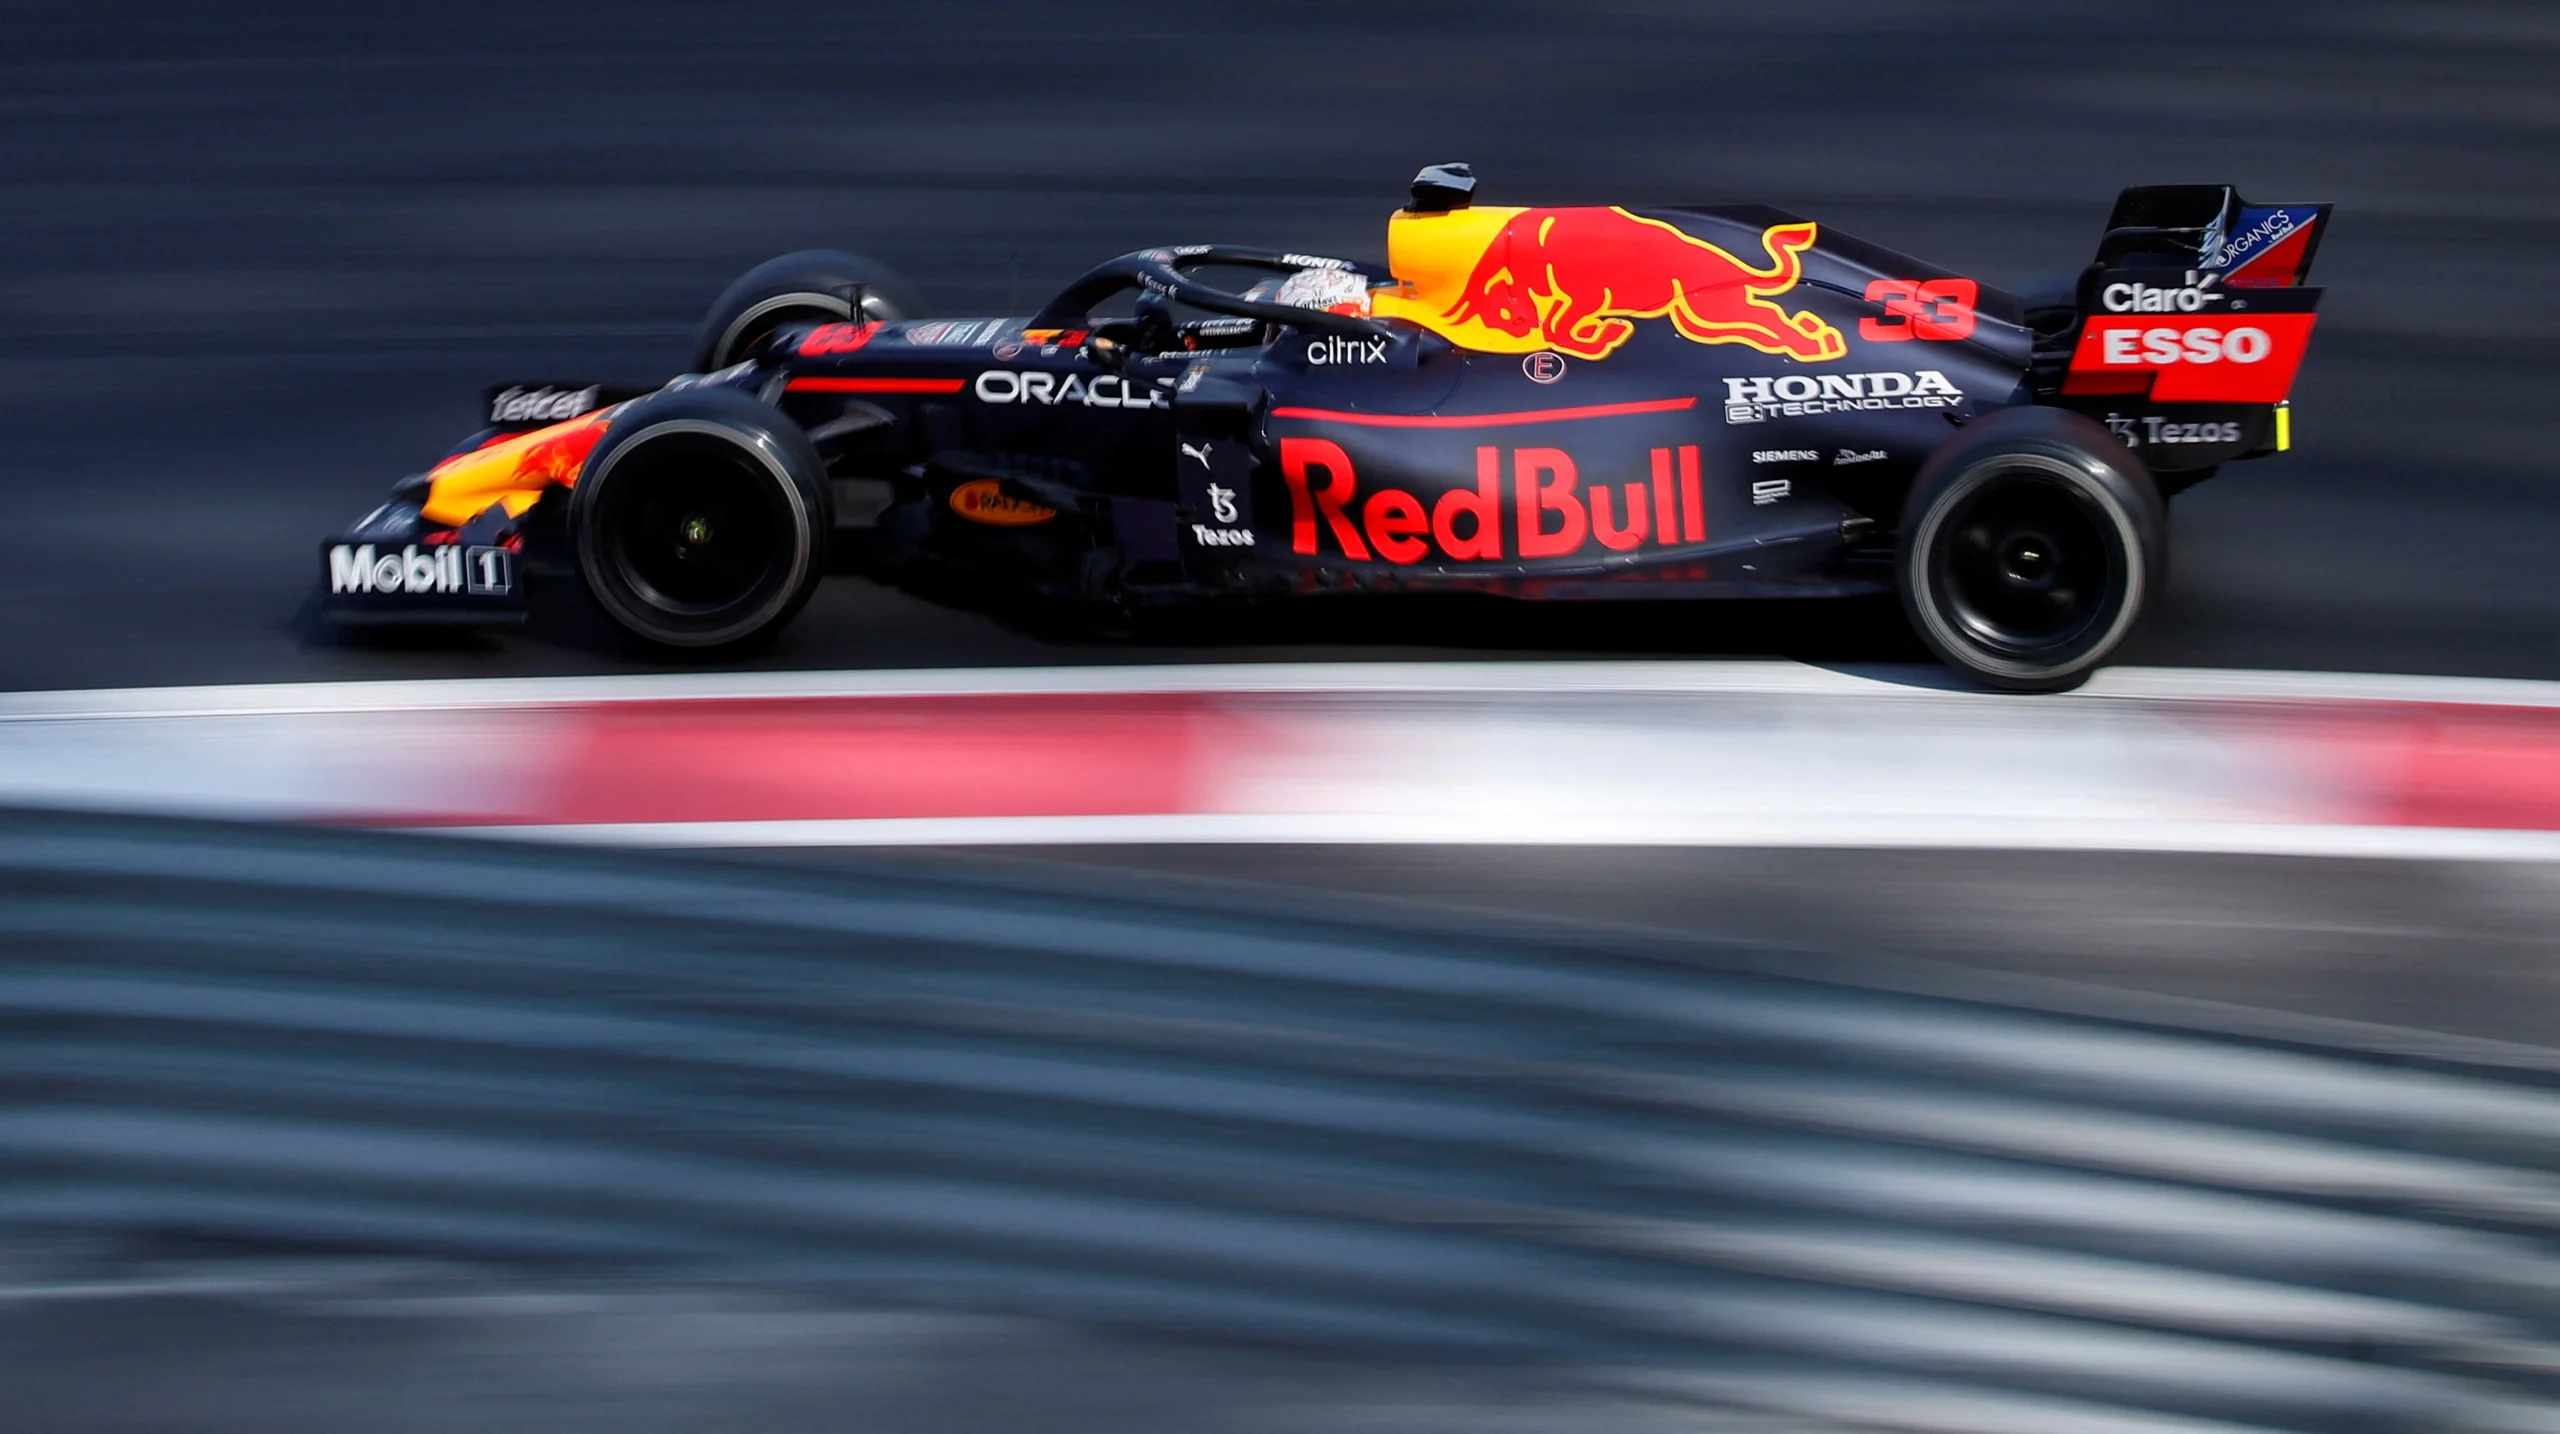 Image of a Red Bull Formula 1 car racing on the track, highlighting the synergy between speed and video marketing.